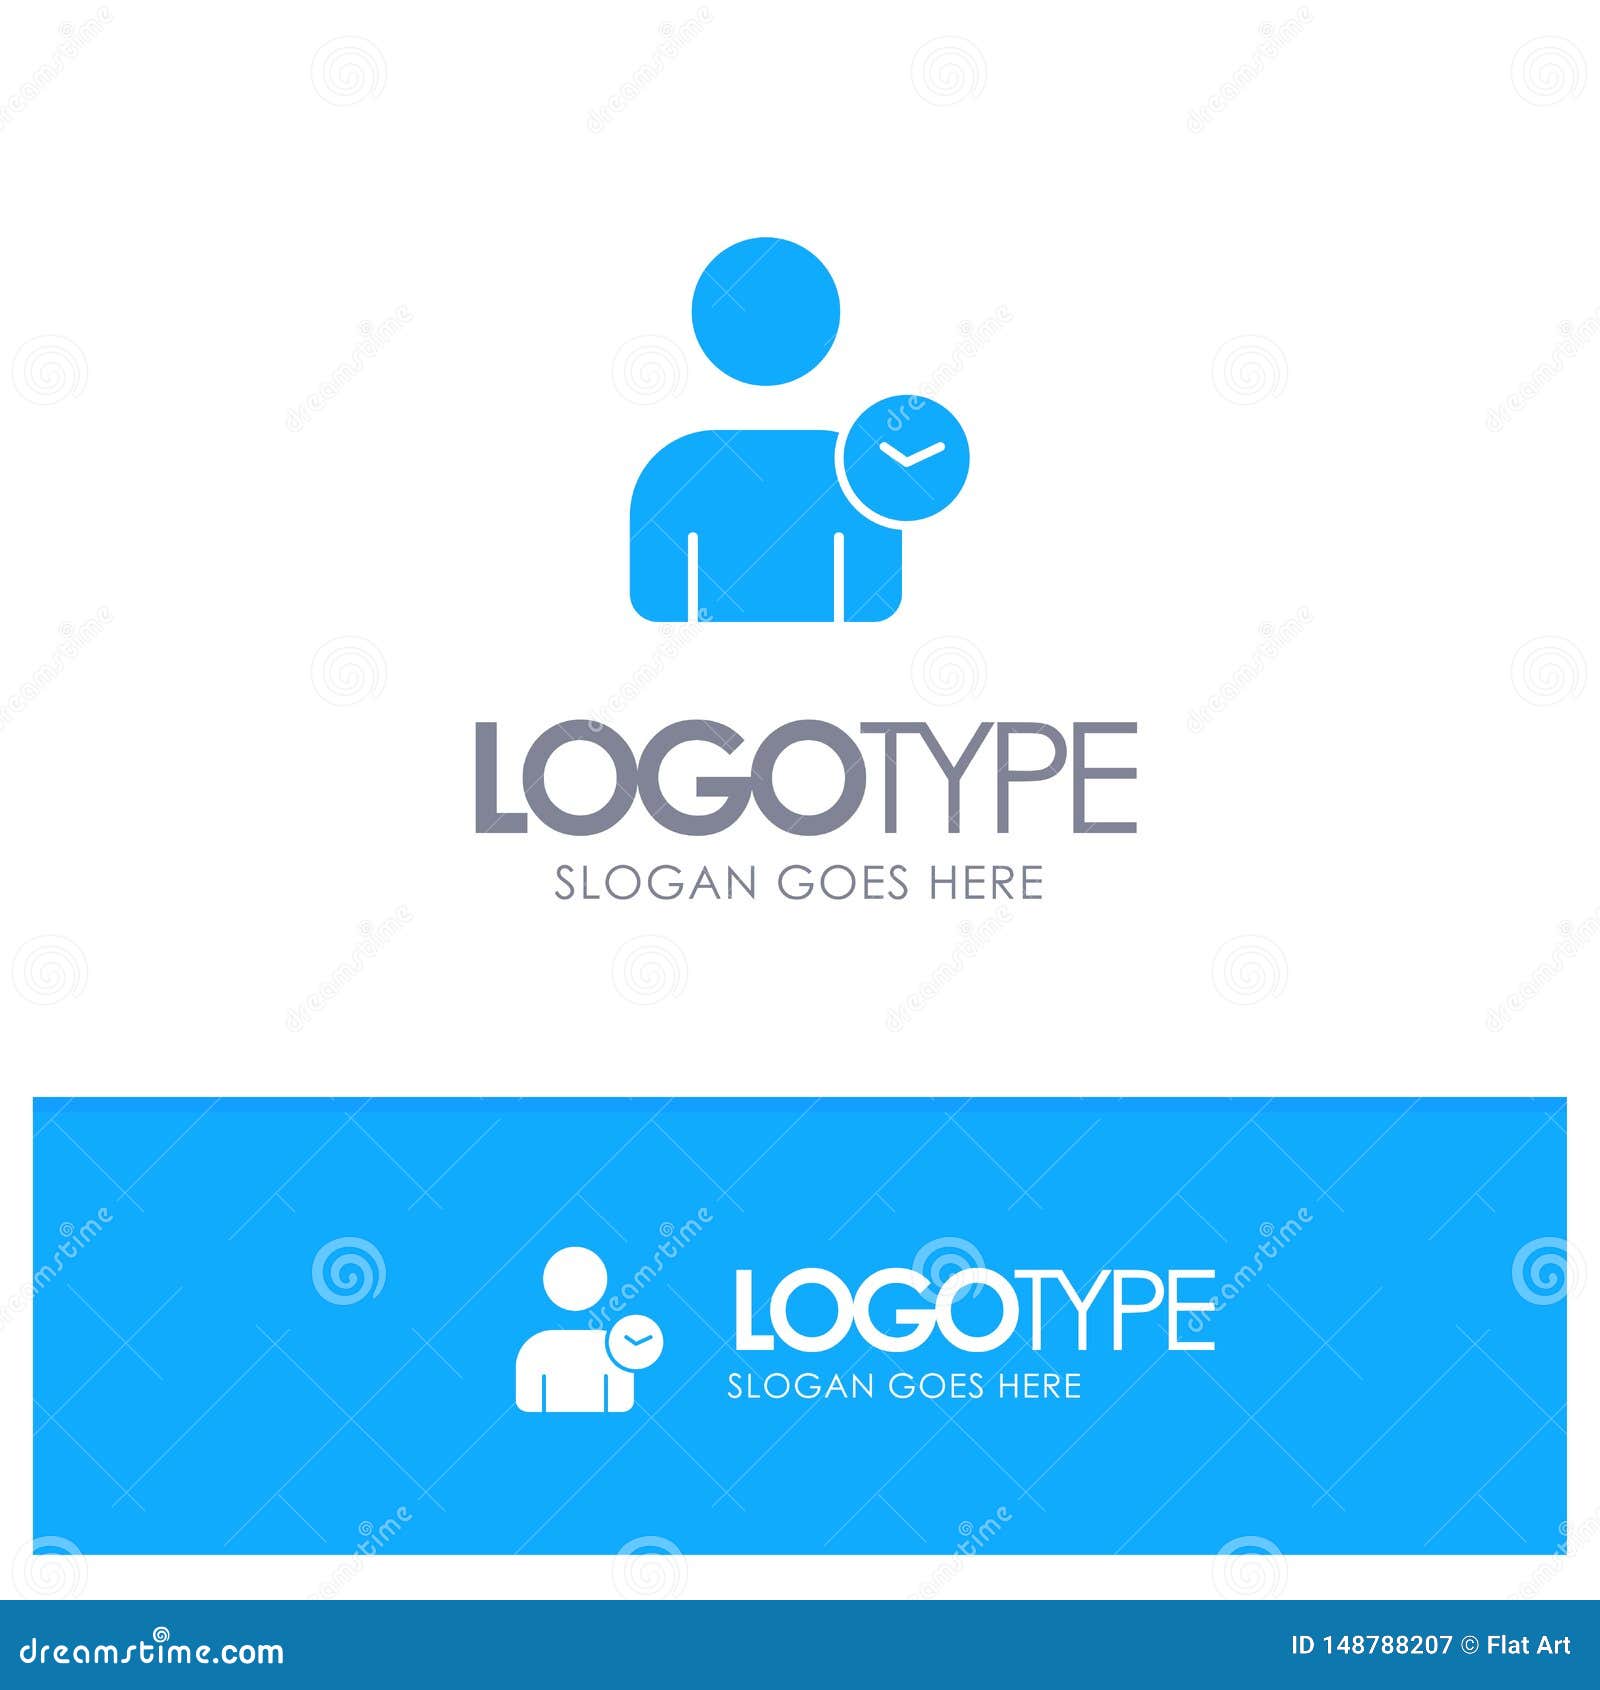 man, user, time, basic blue solid logo with place for tagline